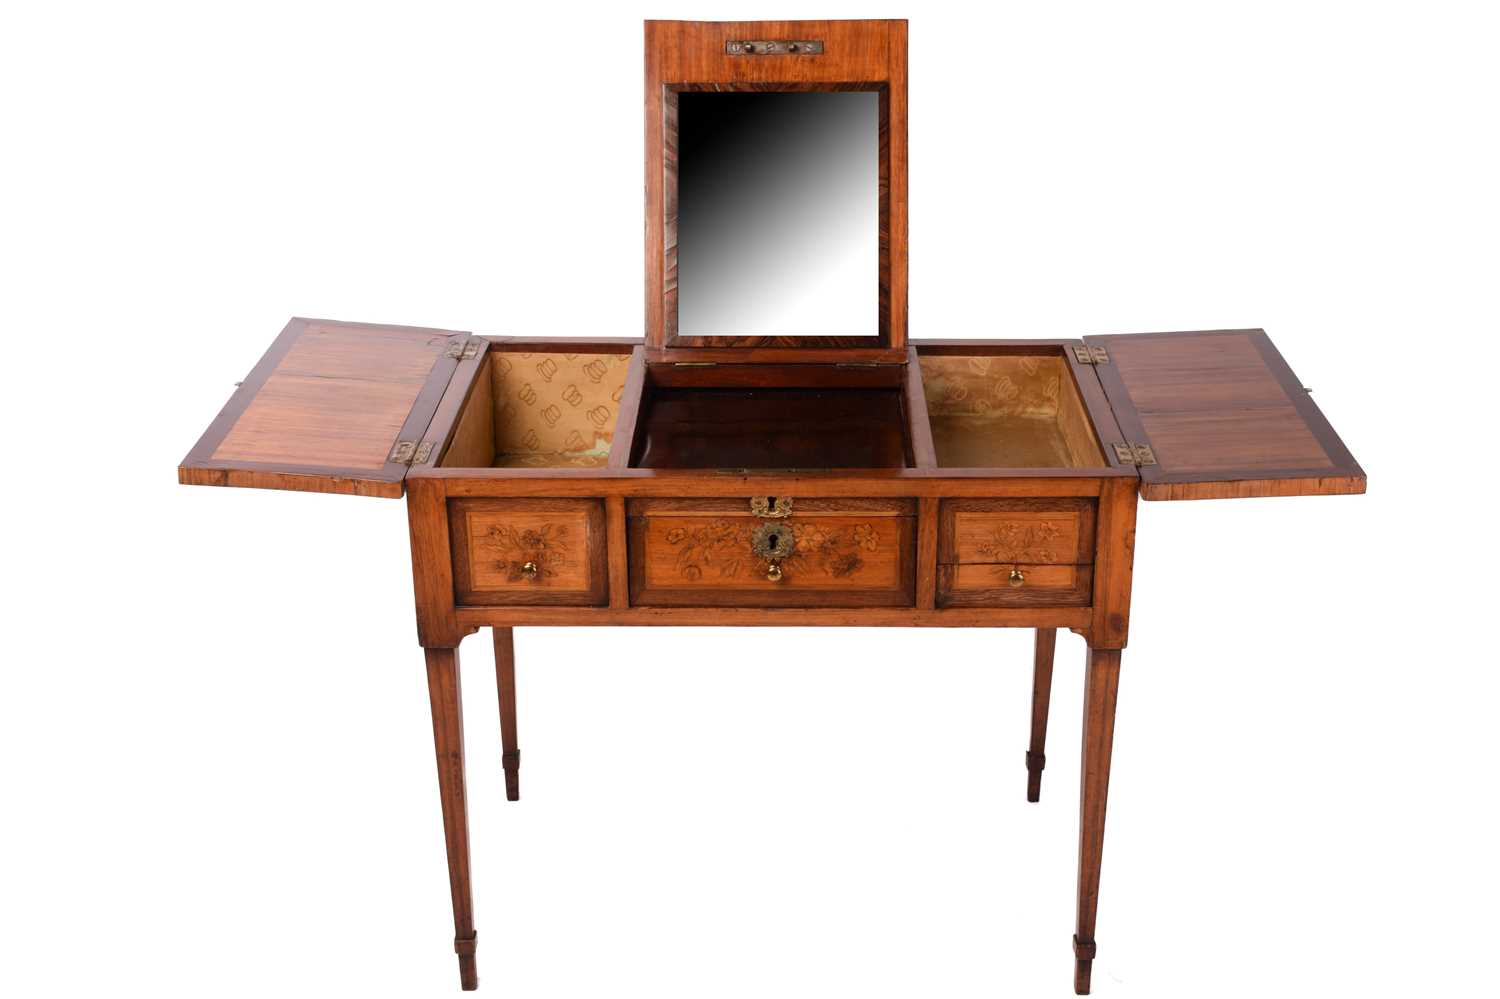 A French marquetry inlaid kingwood poudreuse dressing table decorated with flowers and musical